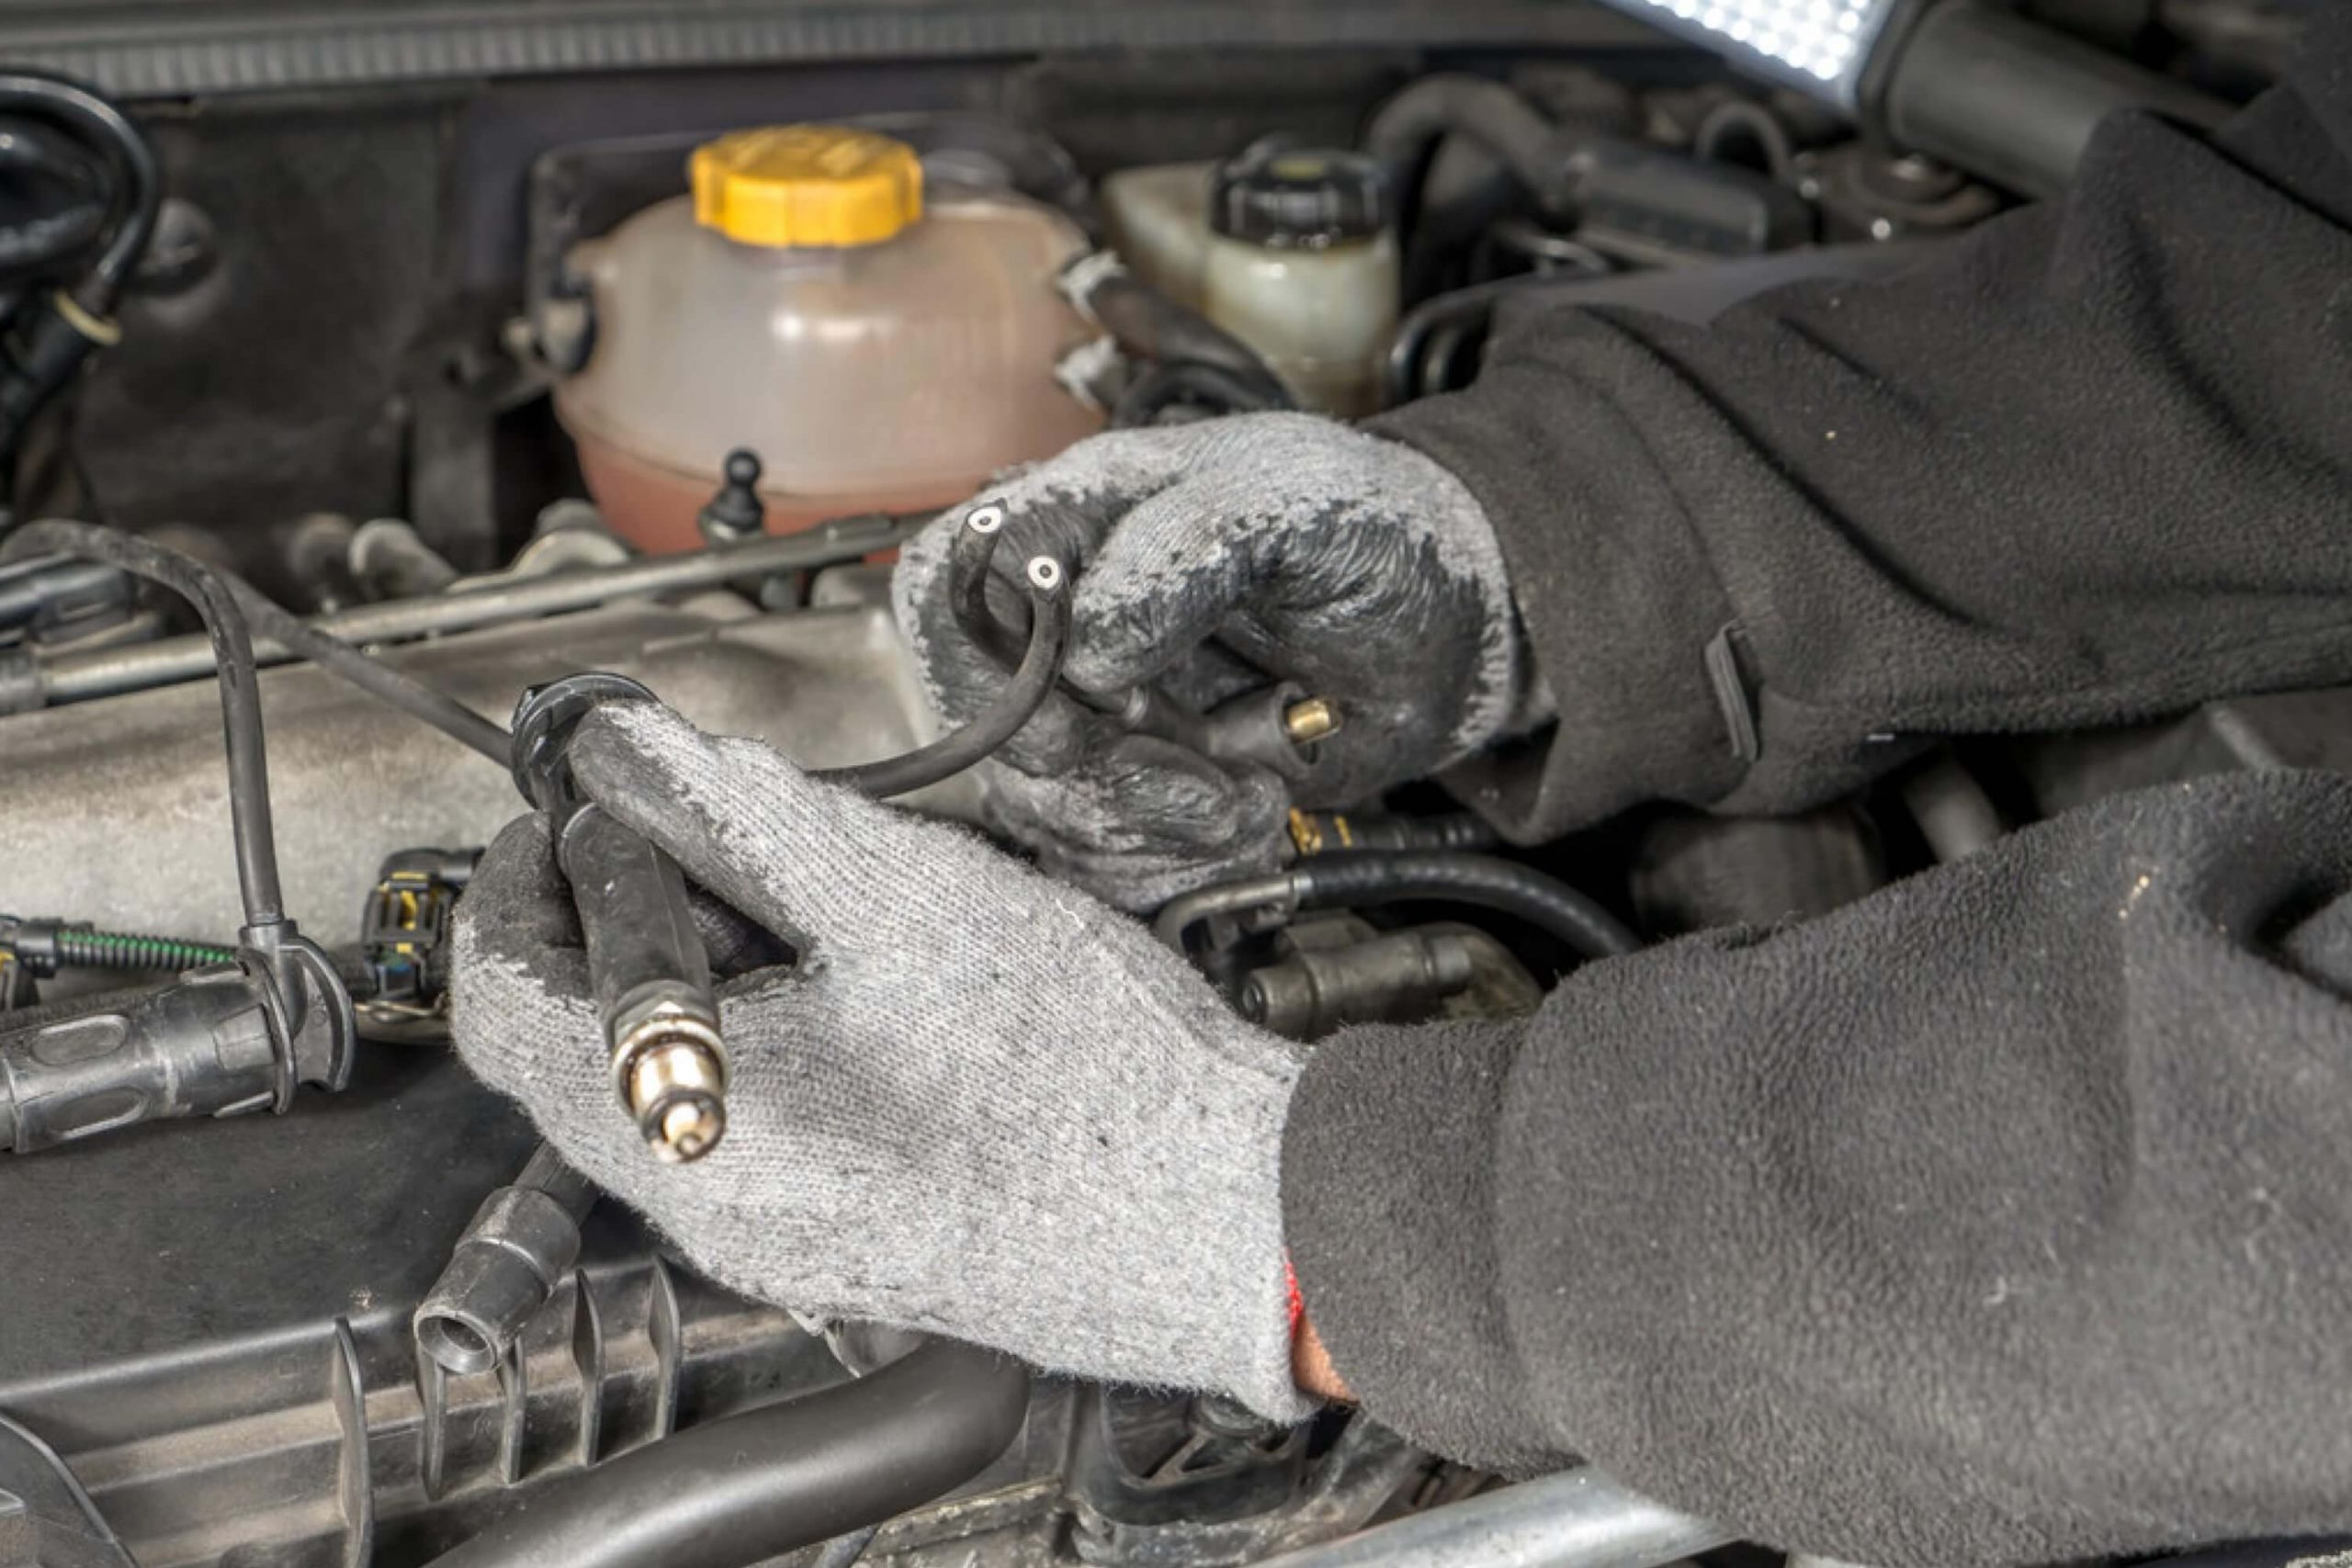 Cleaning Spark Plug Holes With Abrasives